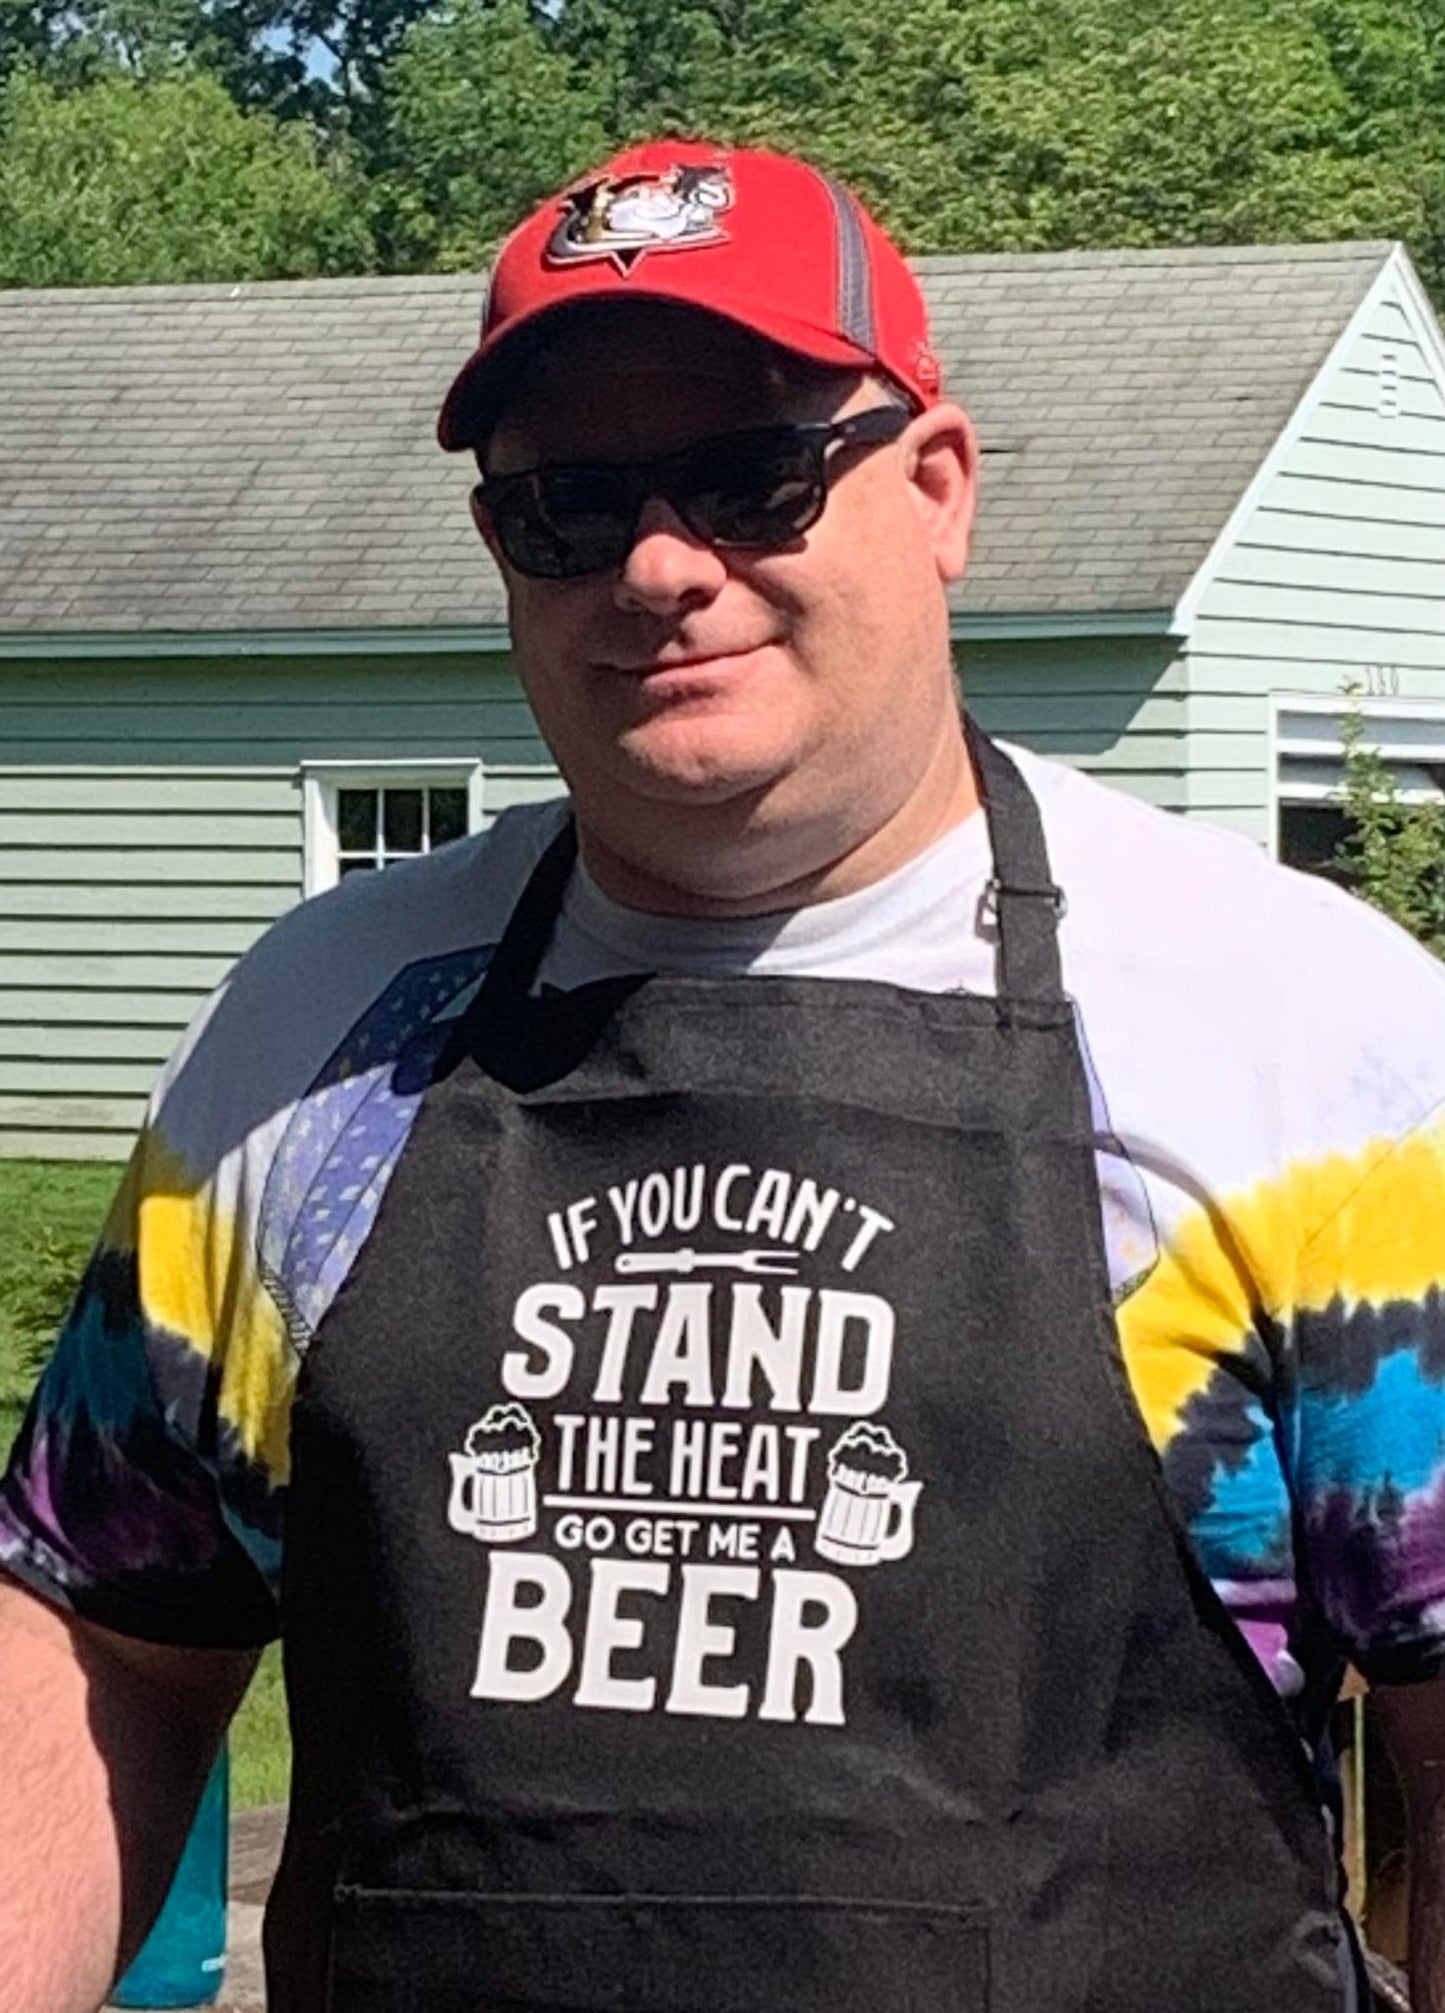 Father’s Day aprons and pot holders | BBQ aprons for the grill chef | Daddy's grill | Beer Humor | BBQ humor